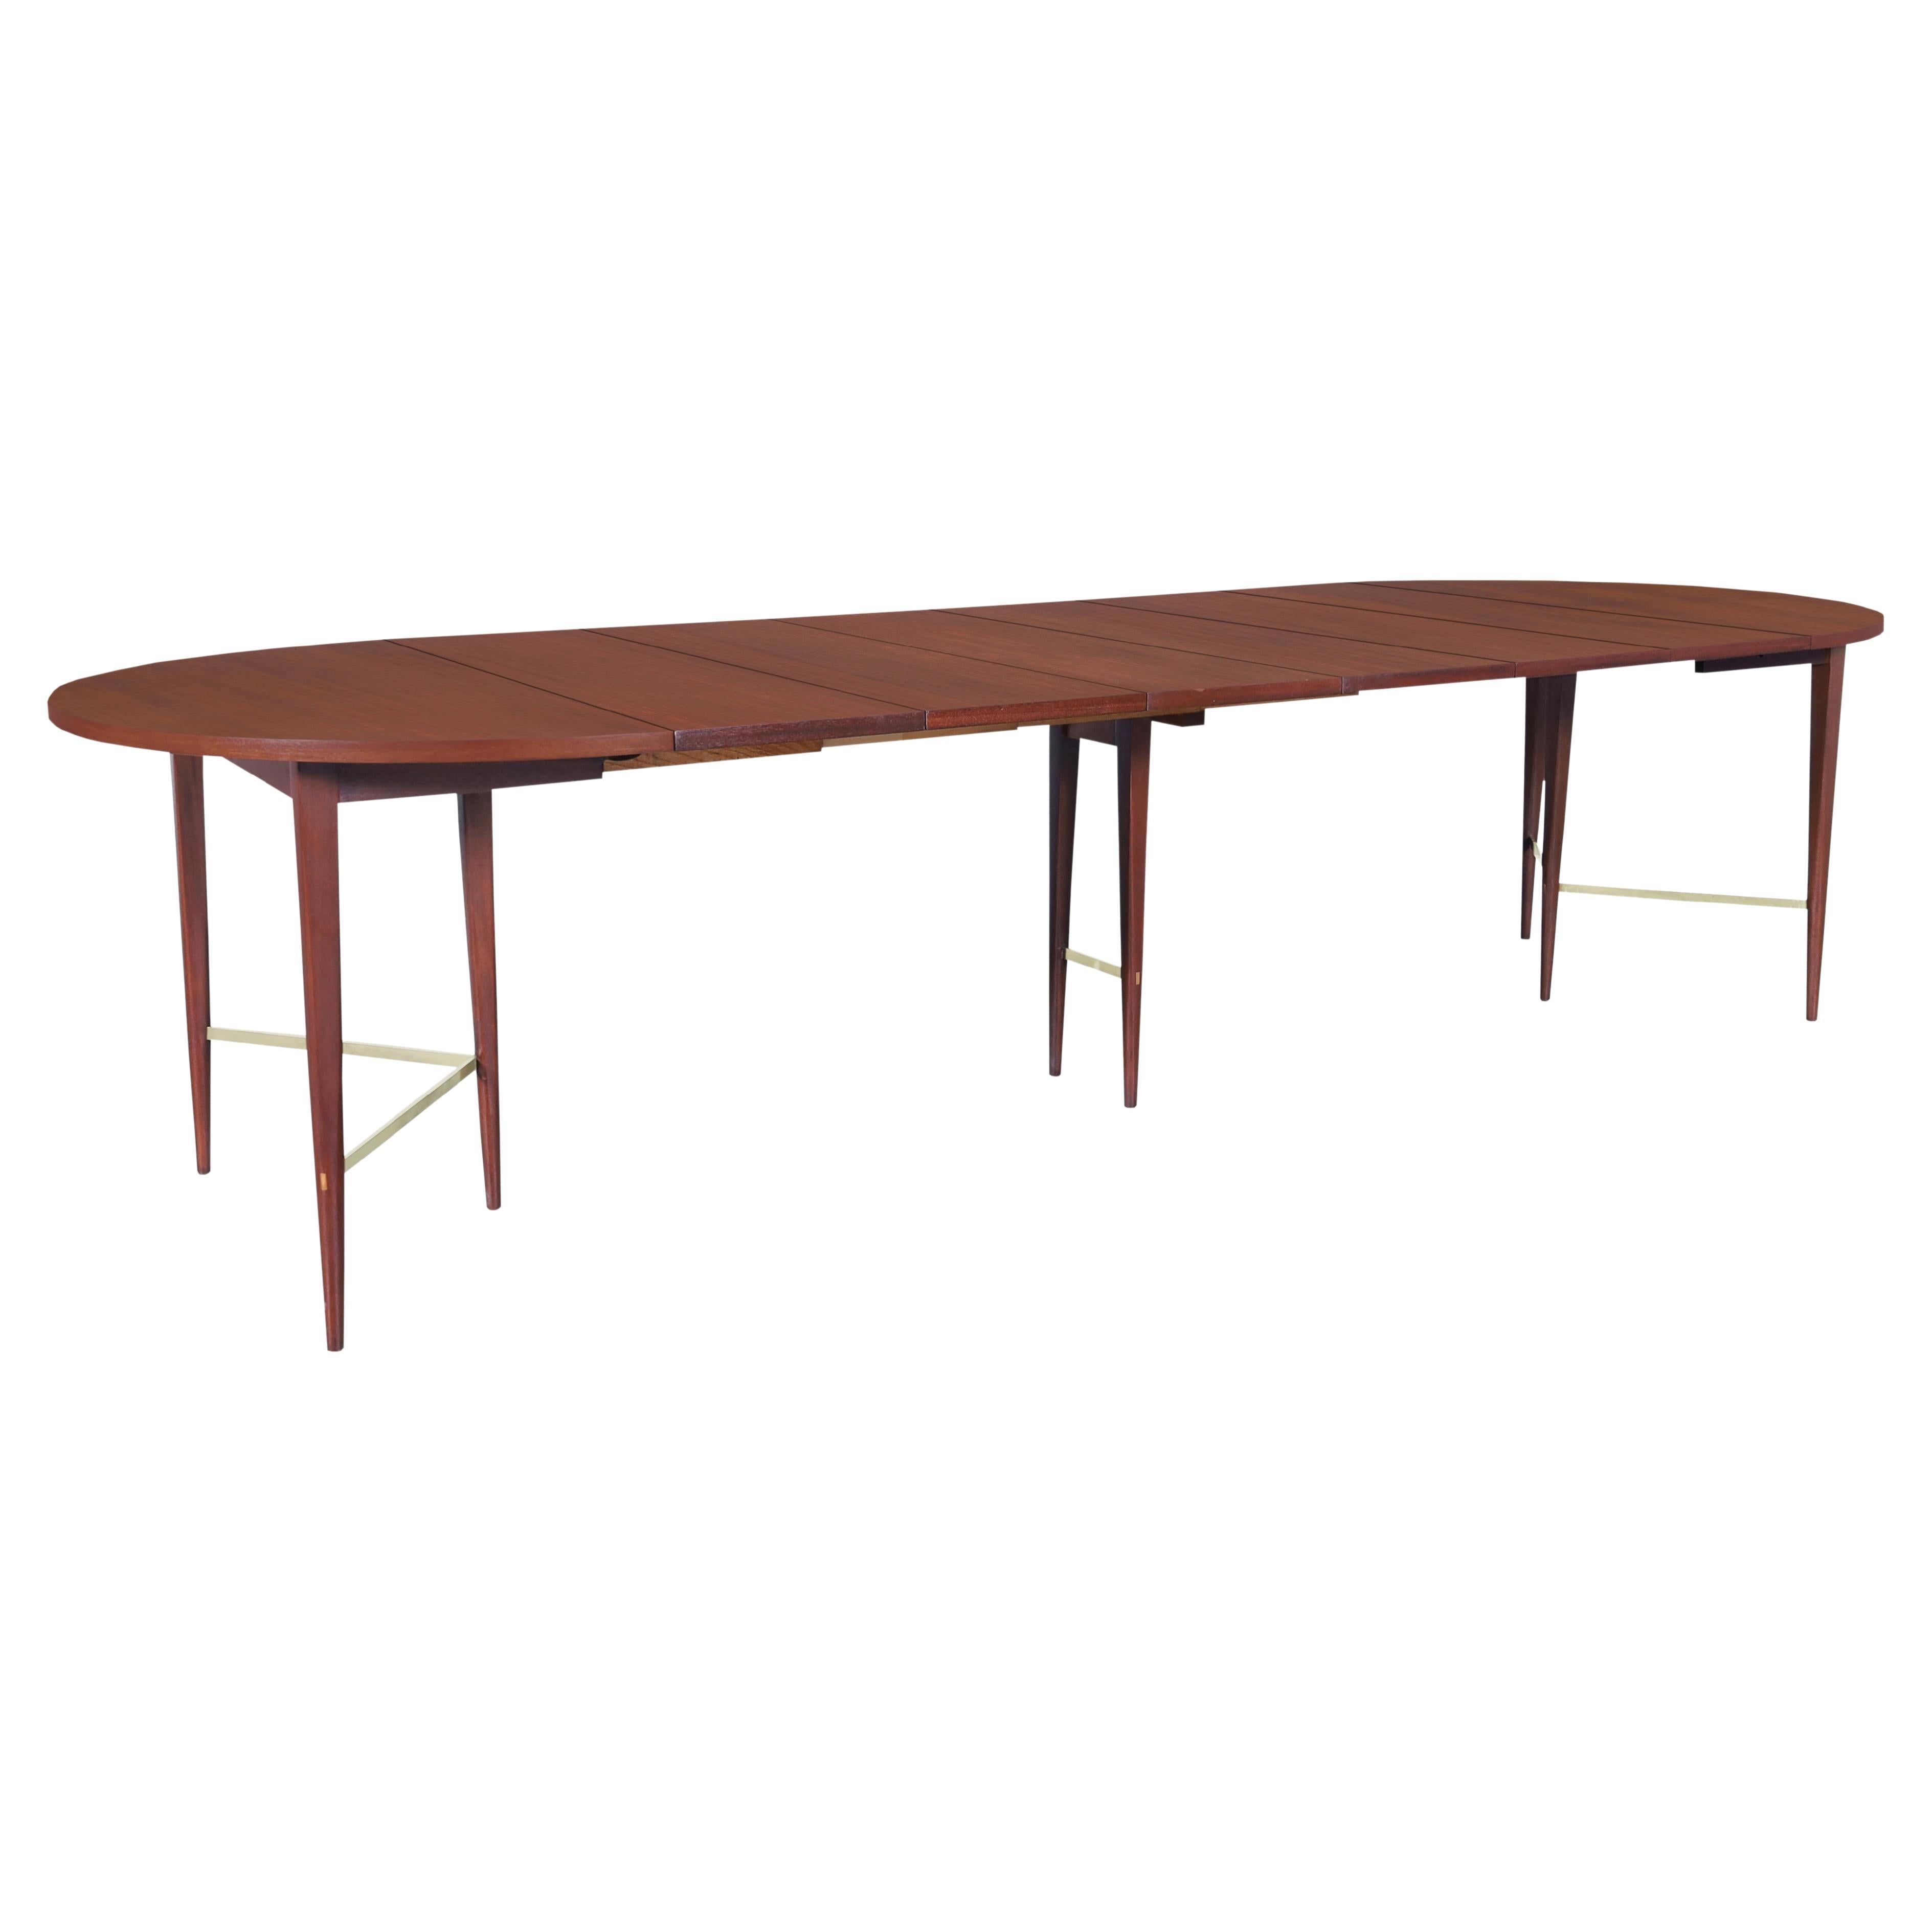 Vintage Mahogany and Brass "Irwin Collection" Dining Table by Paul McCobb For Sale